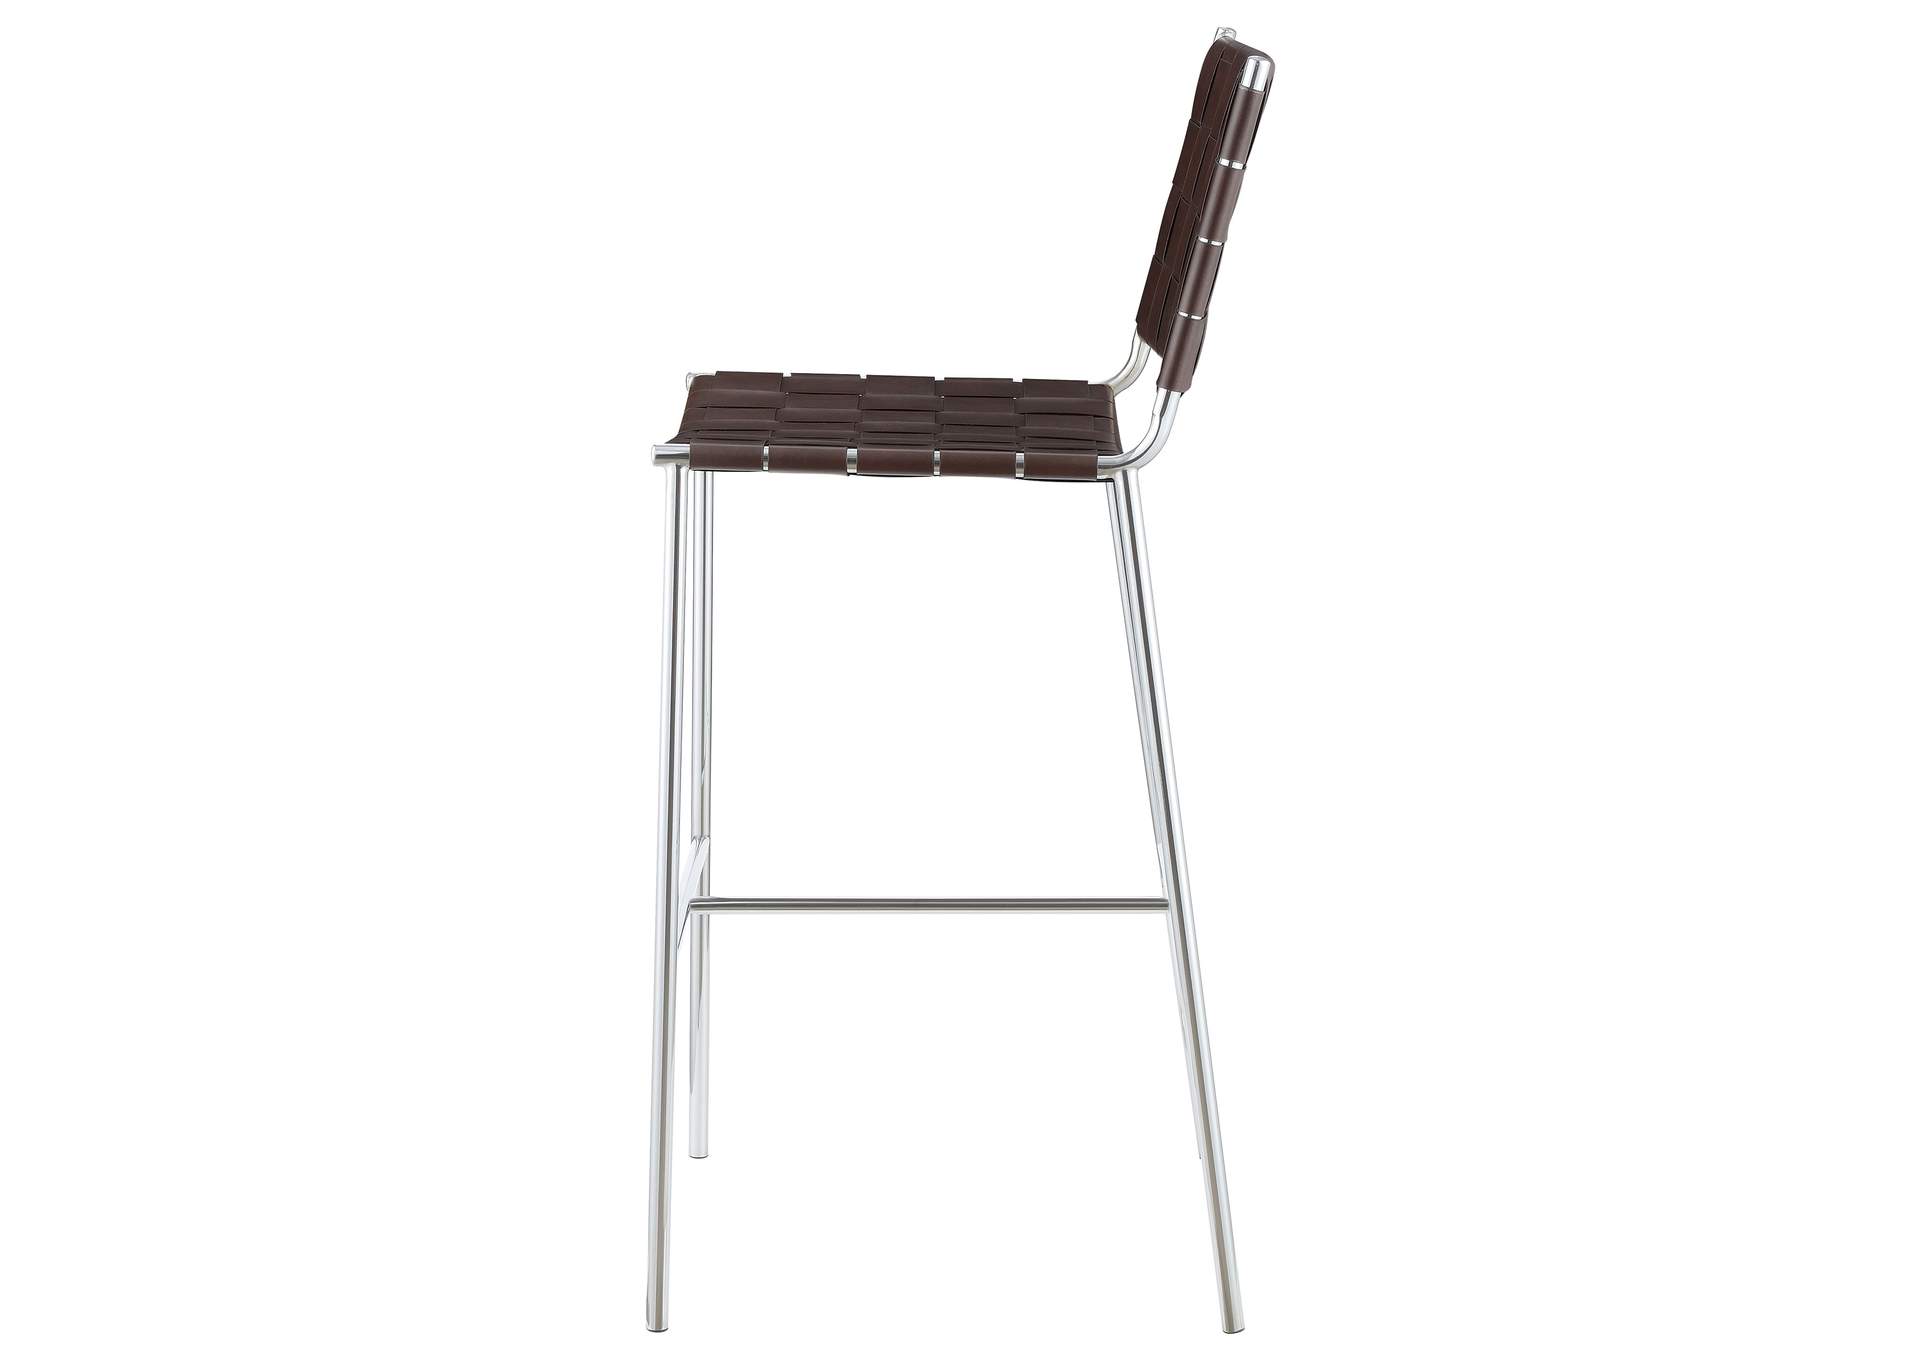 Adelaide Upholstered Bar Stool with Open Back Brown and Chrome,Coaster Furniture